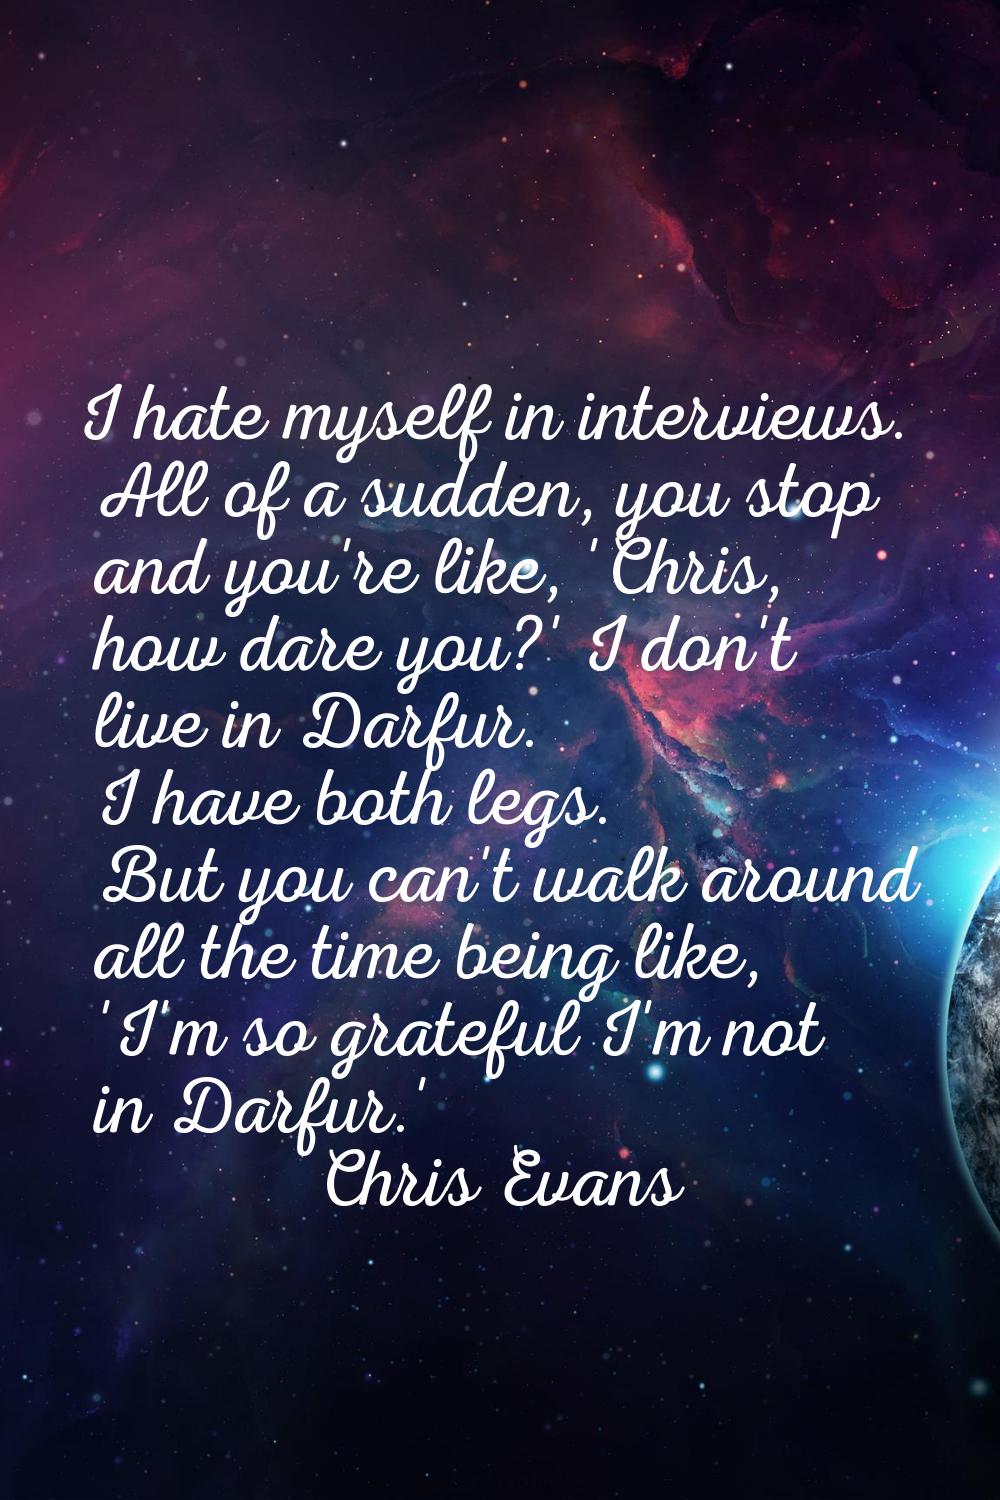 I hate myself in interviews. All of a sudden, you stop and you're like, 'Chris, how dare you?' I do